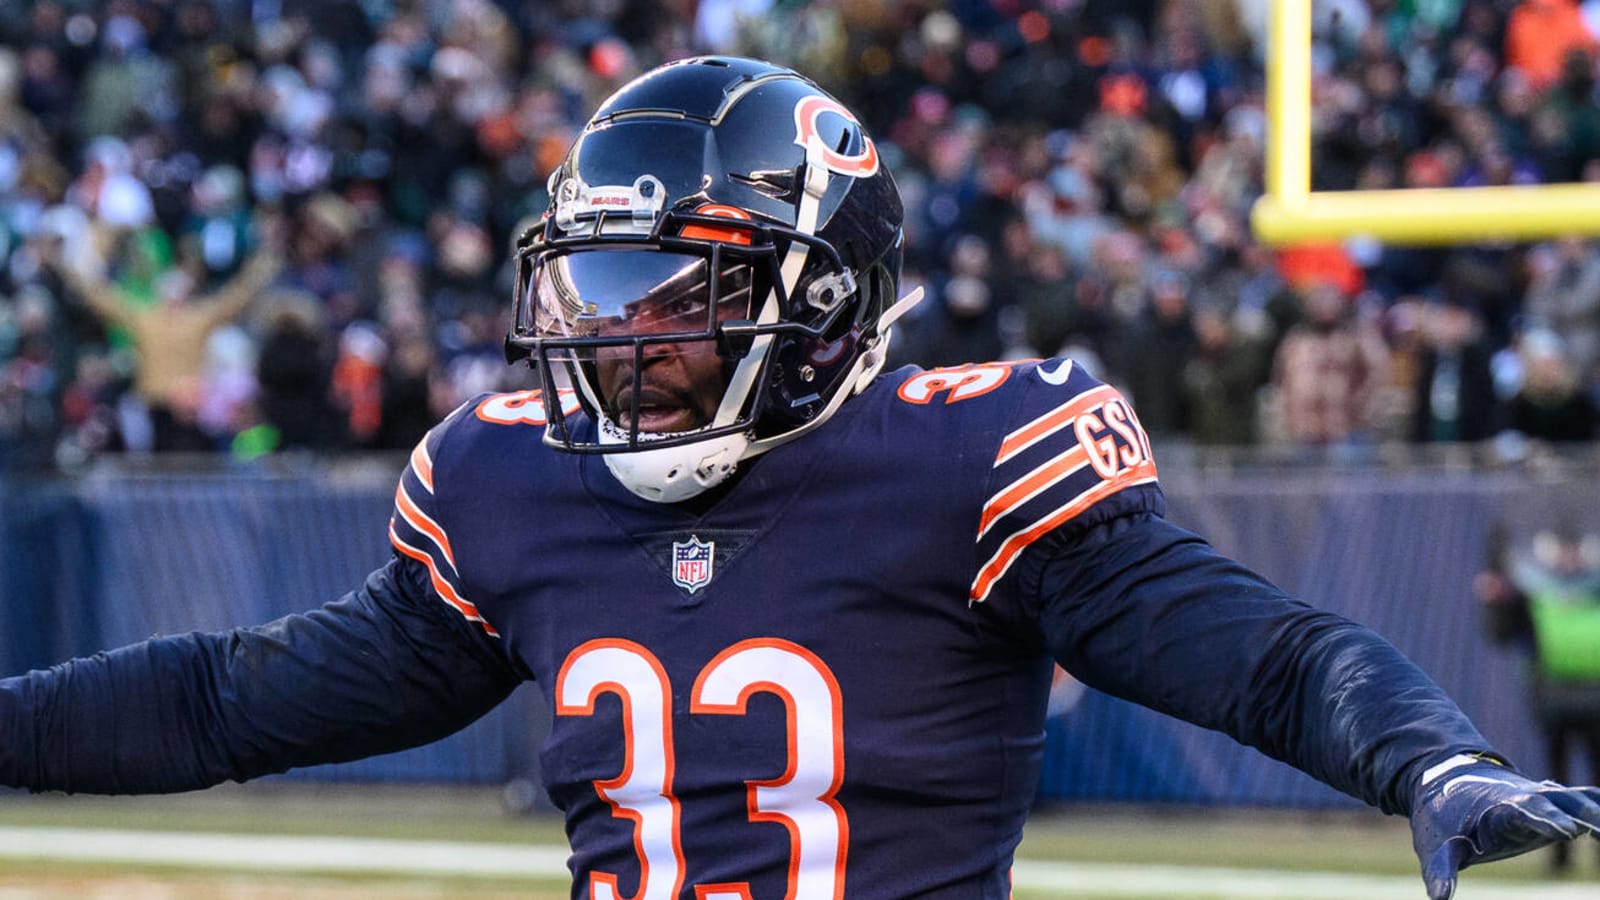 Bears Pro Bowl defender has money on his mind as free agency looms